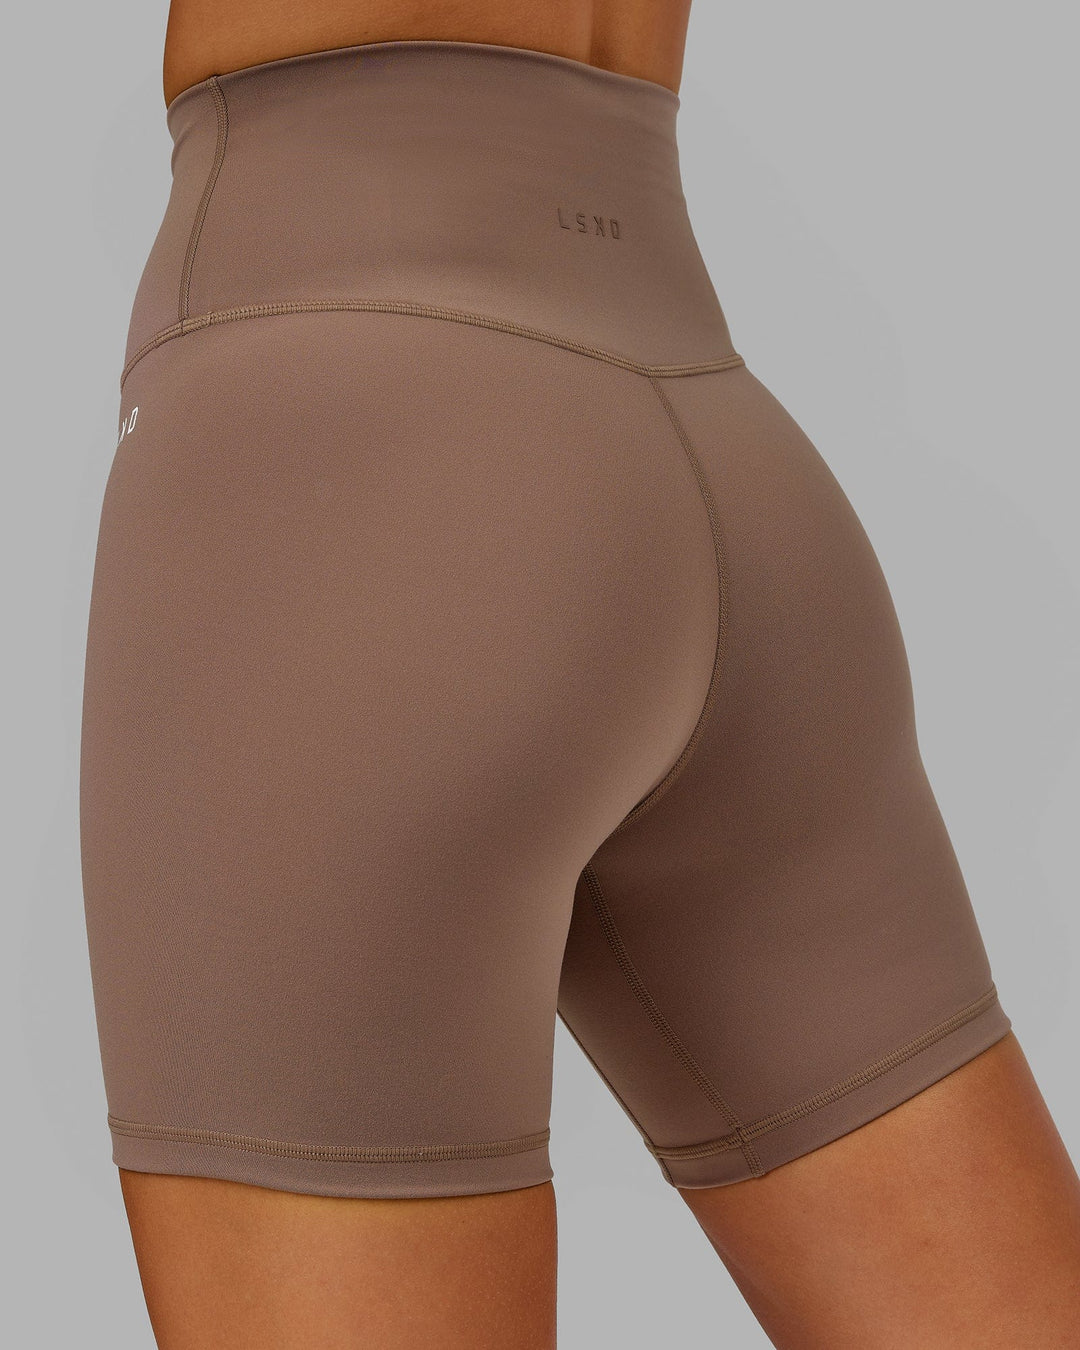 Woman wearing Base 2.0 Mid Short Tight - Deep Taupe